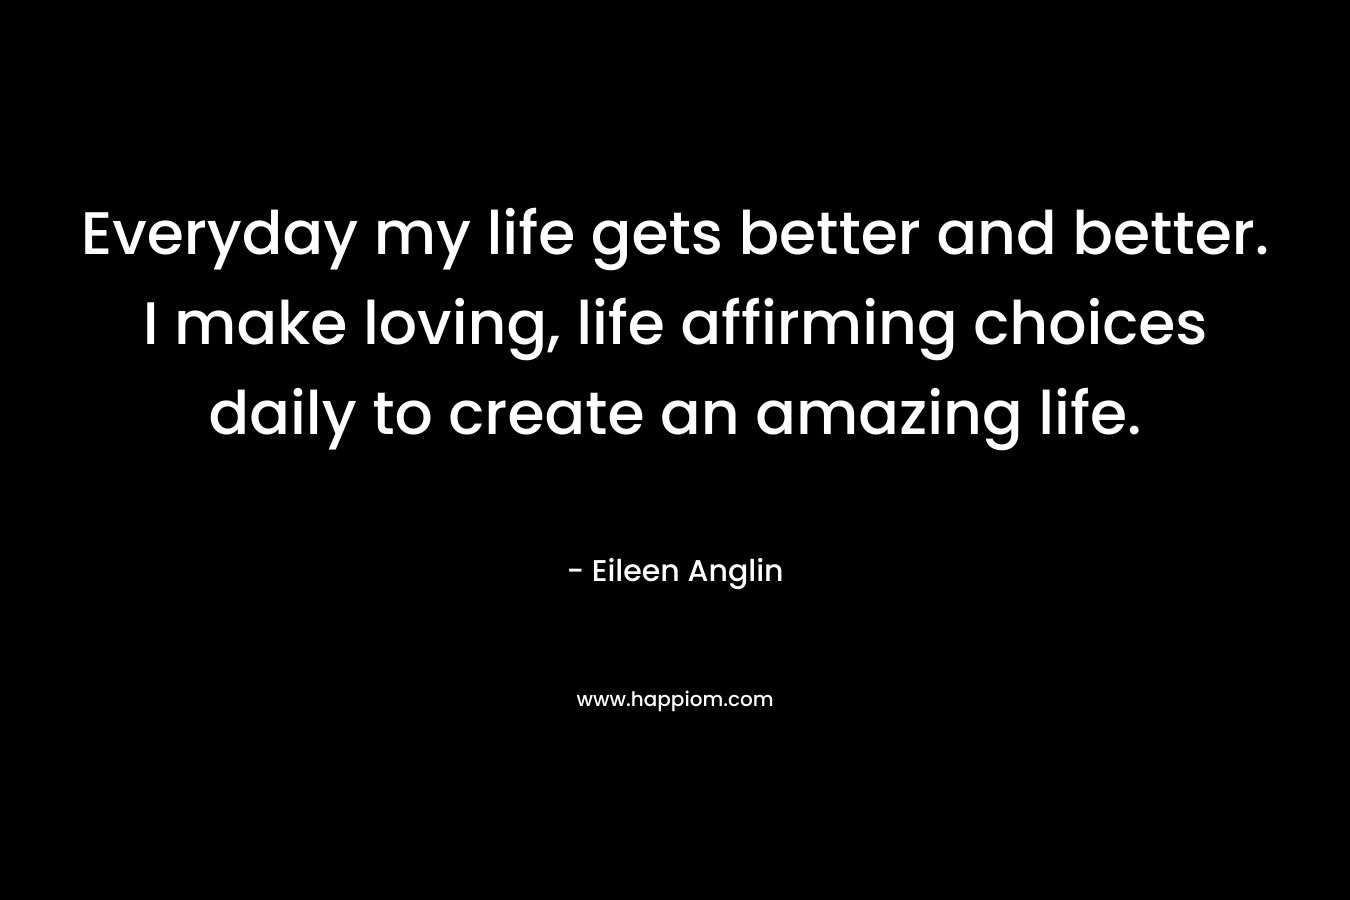 Everyday my life gets better and better. I make loving, life affirming choices daily to create an amazing life. – Eileen Anglin